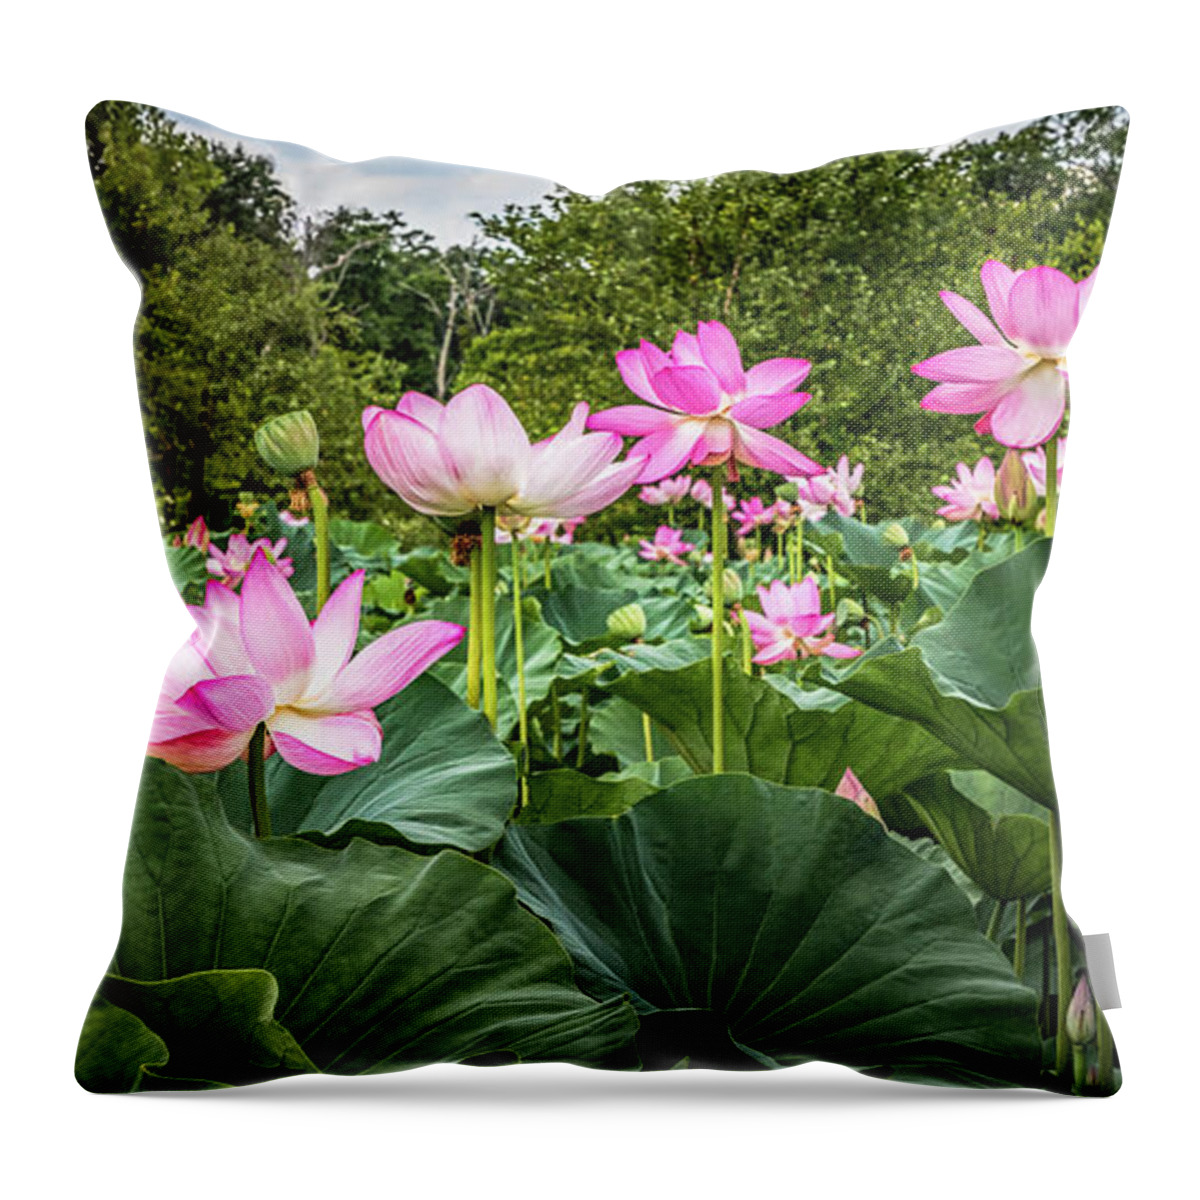 Lotus Flowers Throw Pillow featuring the photograph A Pond With Lotus Flowers by Elvira Peretsman